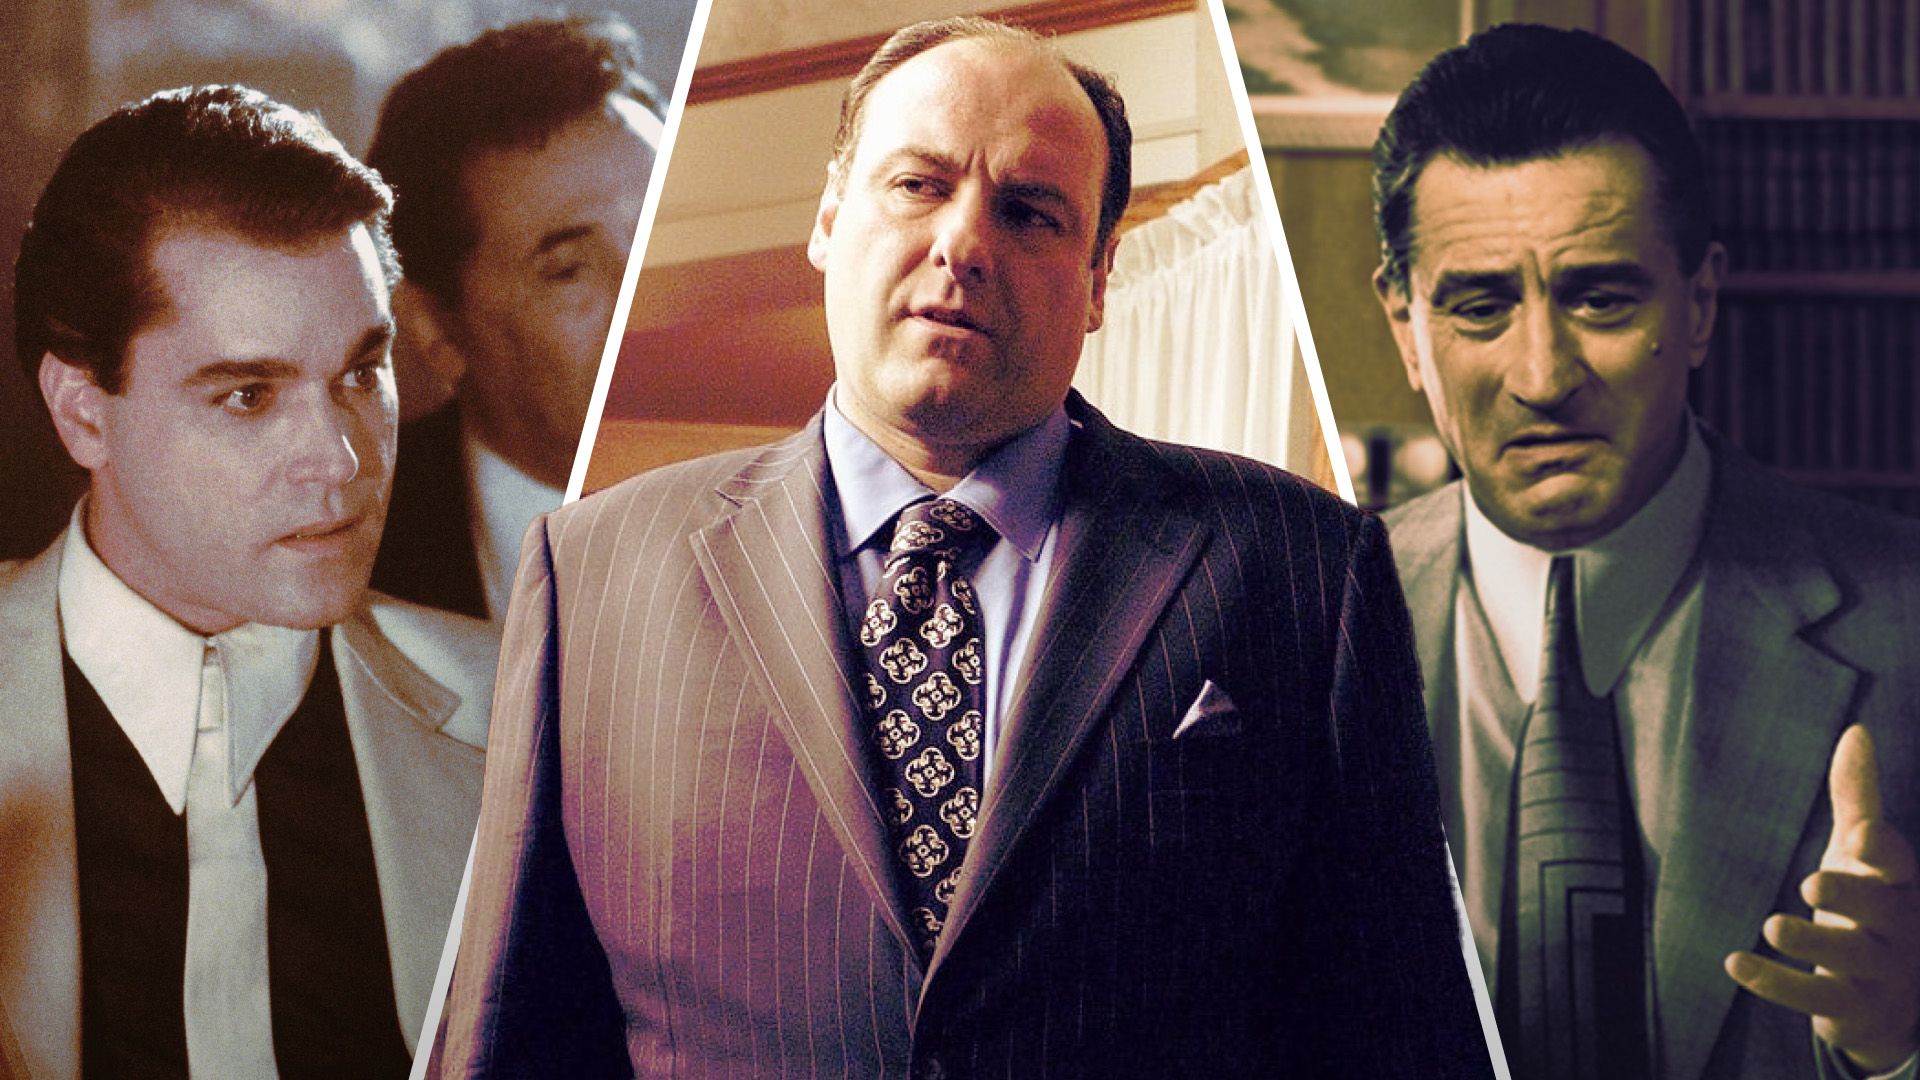 10 Gangster Movie Easter Eggs and References in The Sopranos